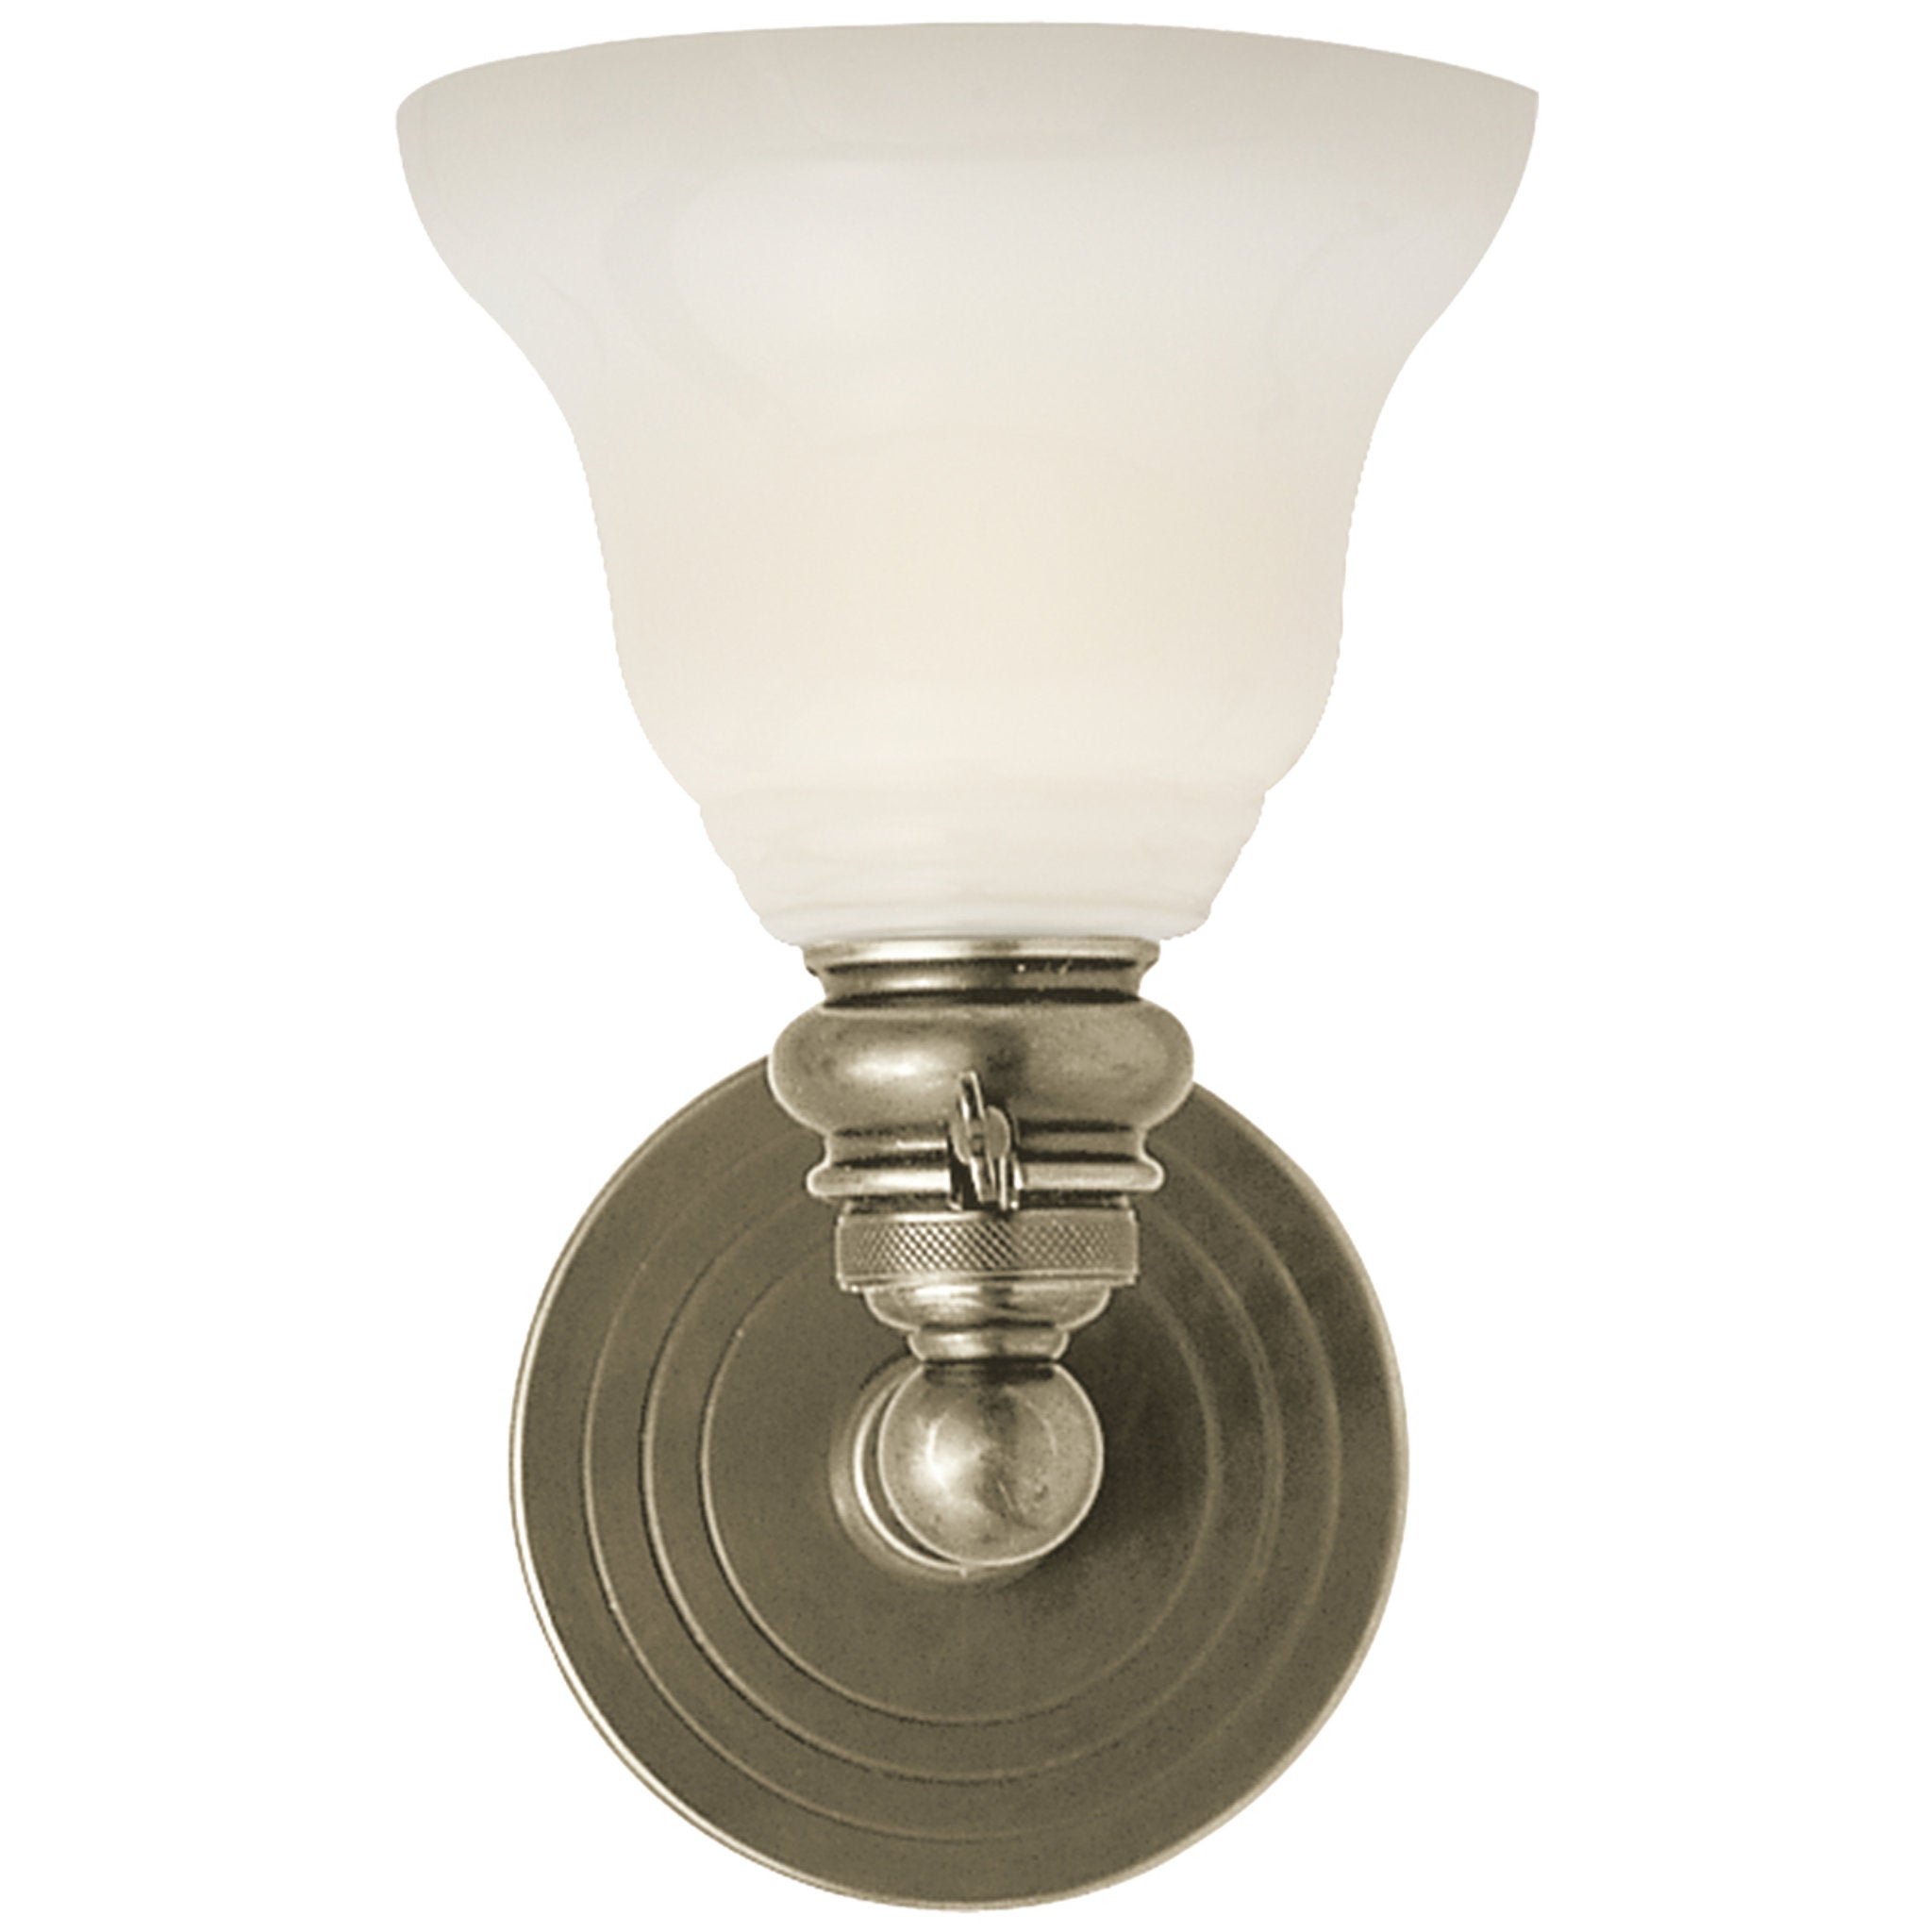 CHD2153ABWG by Visual Comfort - Pimlico Single Light in Antique